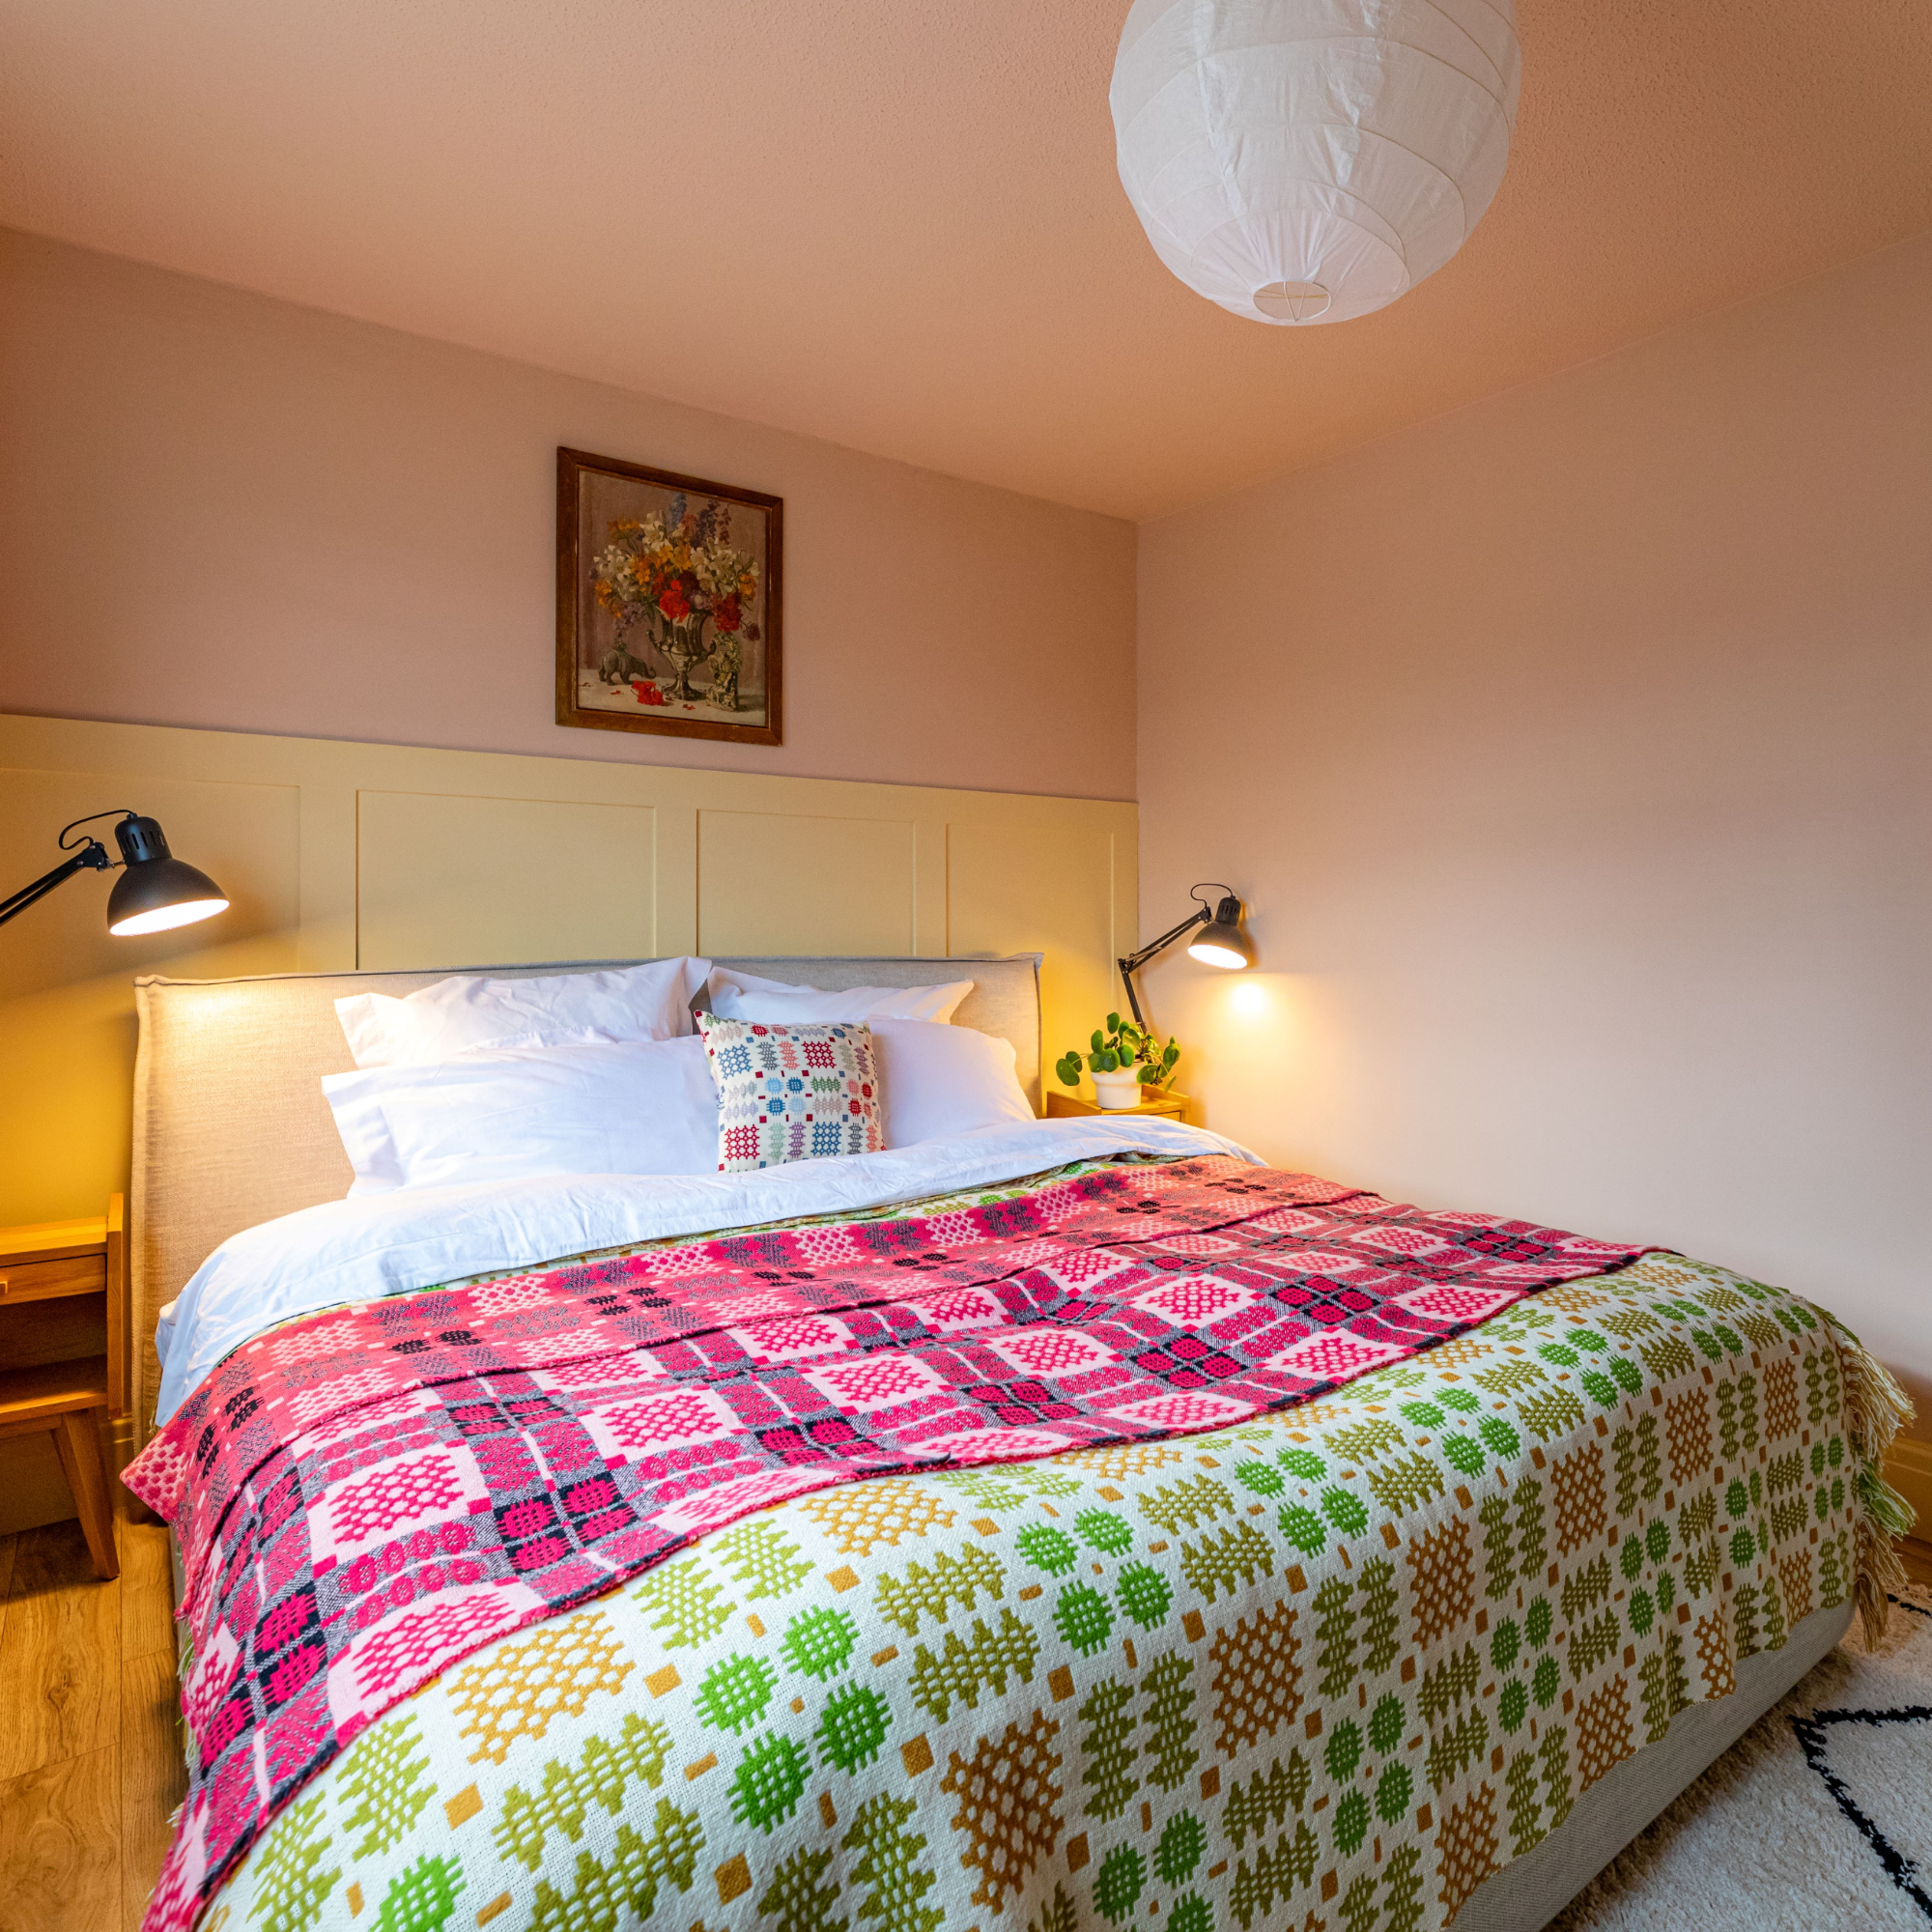 Bedroom with double bed and colourful blankets, bedside tables and lamps, green curtains